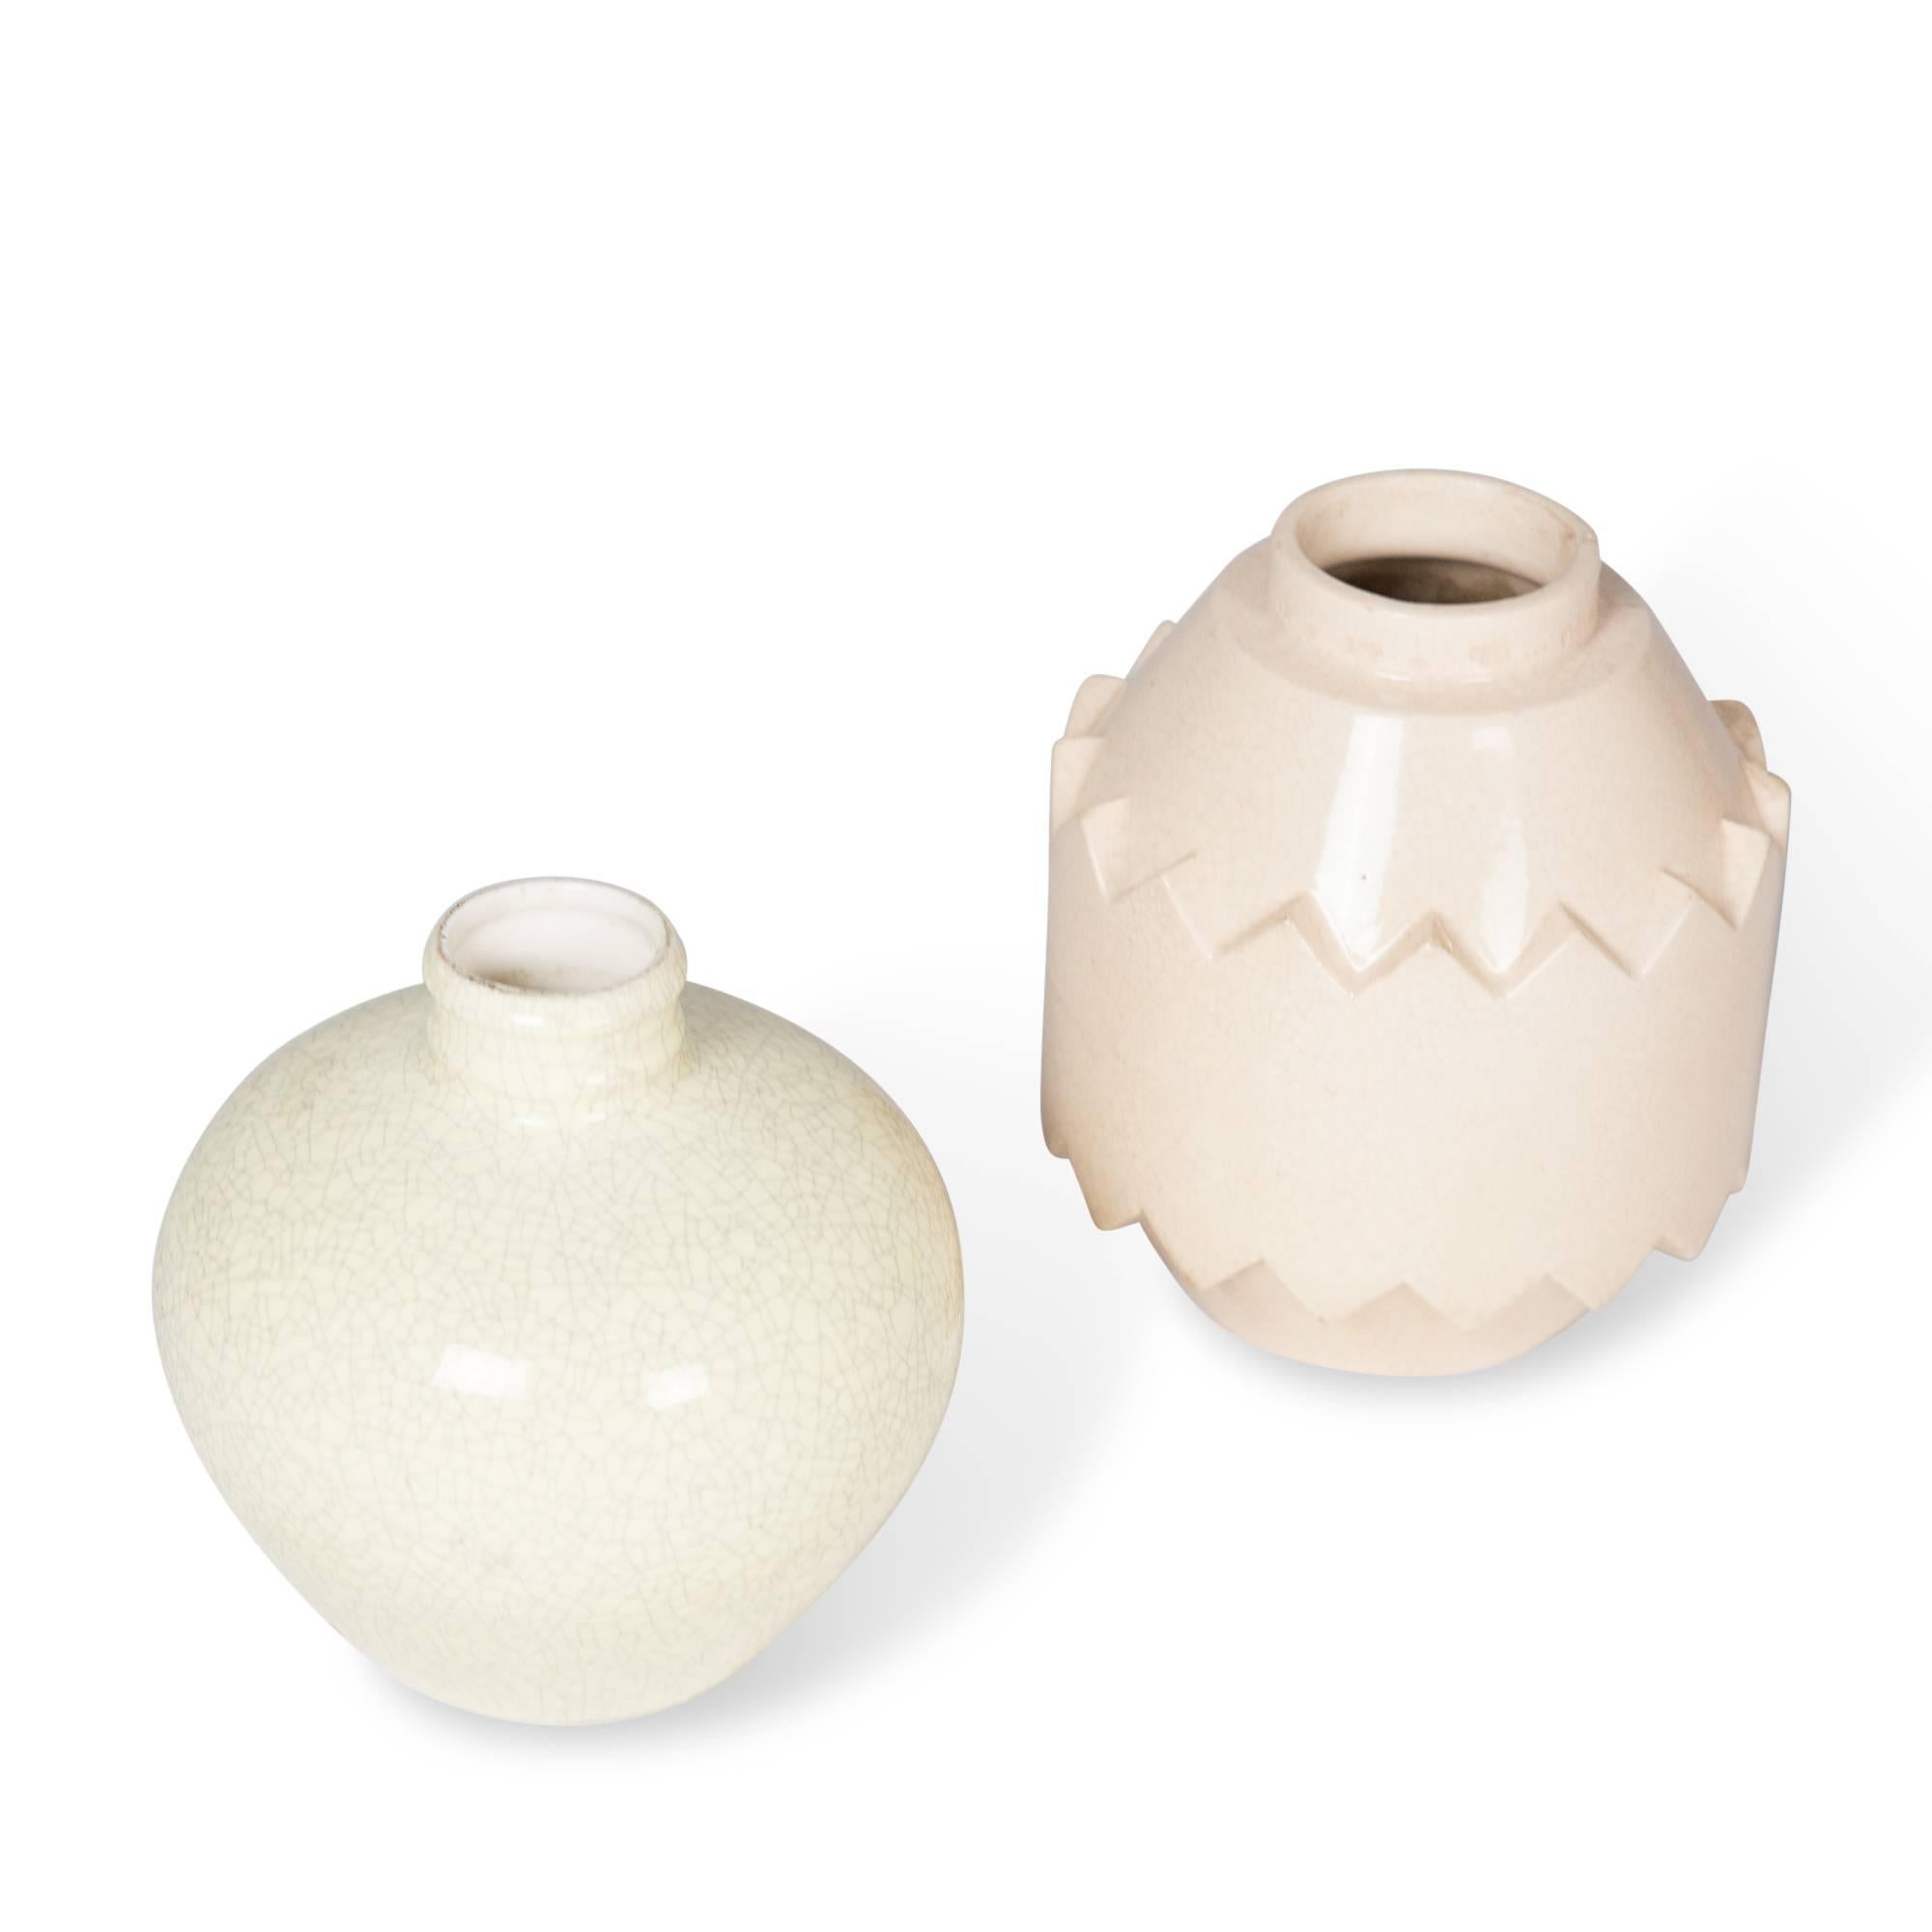 Two ceramics.
On left: Off-white crackle glazed ceramic vase, bulbous form with short neck, by Boch La Louviere, Belgium 1930s. Signed to underside. Height 7 in, diameter 7 in.

On right: Beige crackle glaze ceramic vase, of cylindrical form and